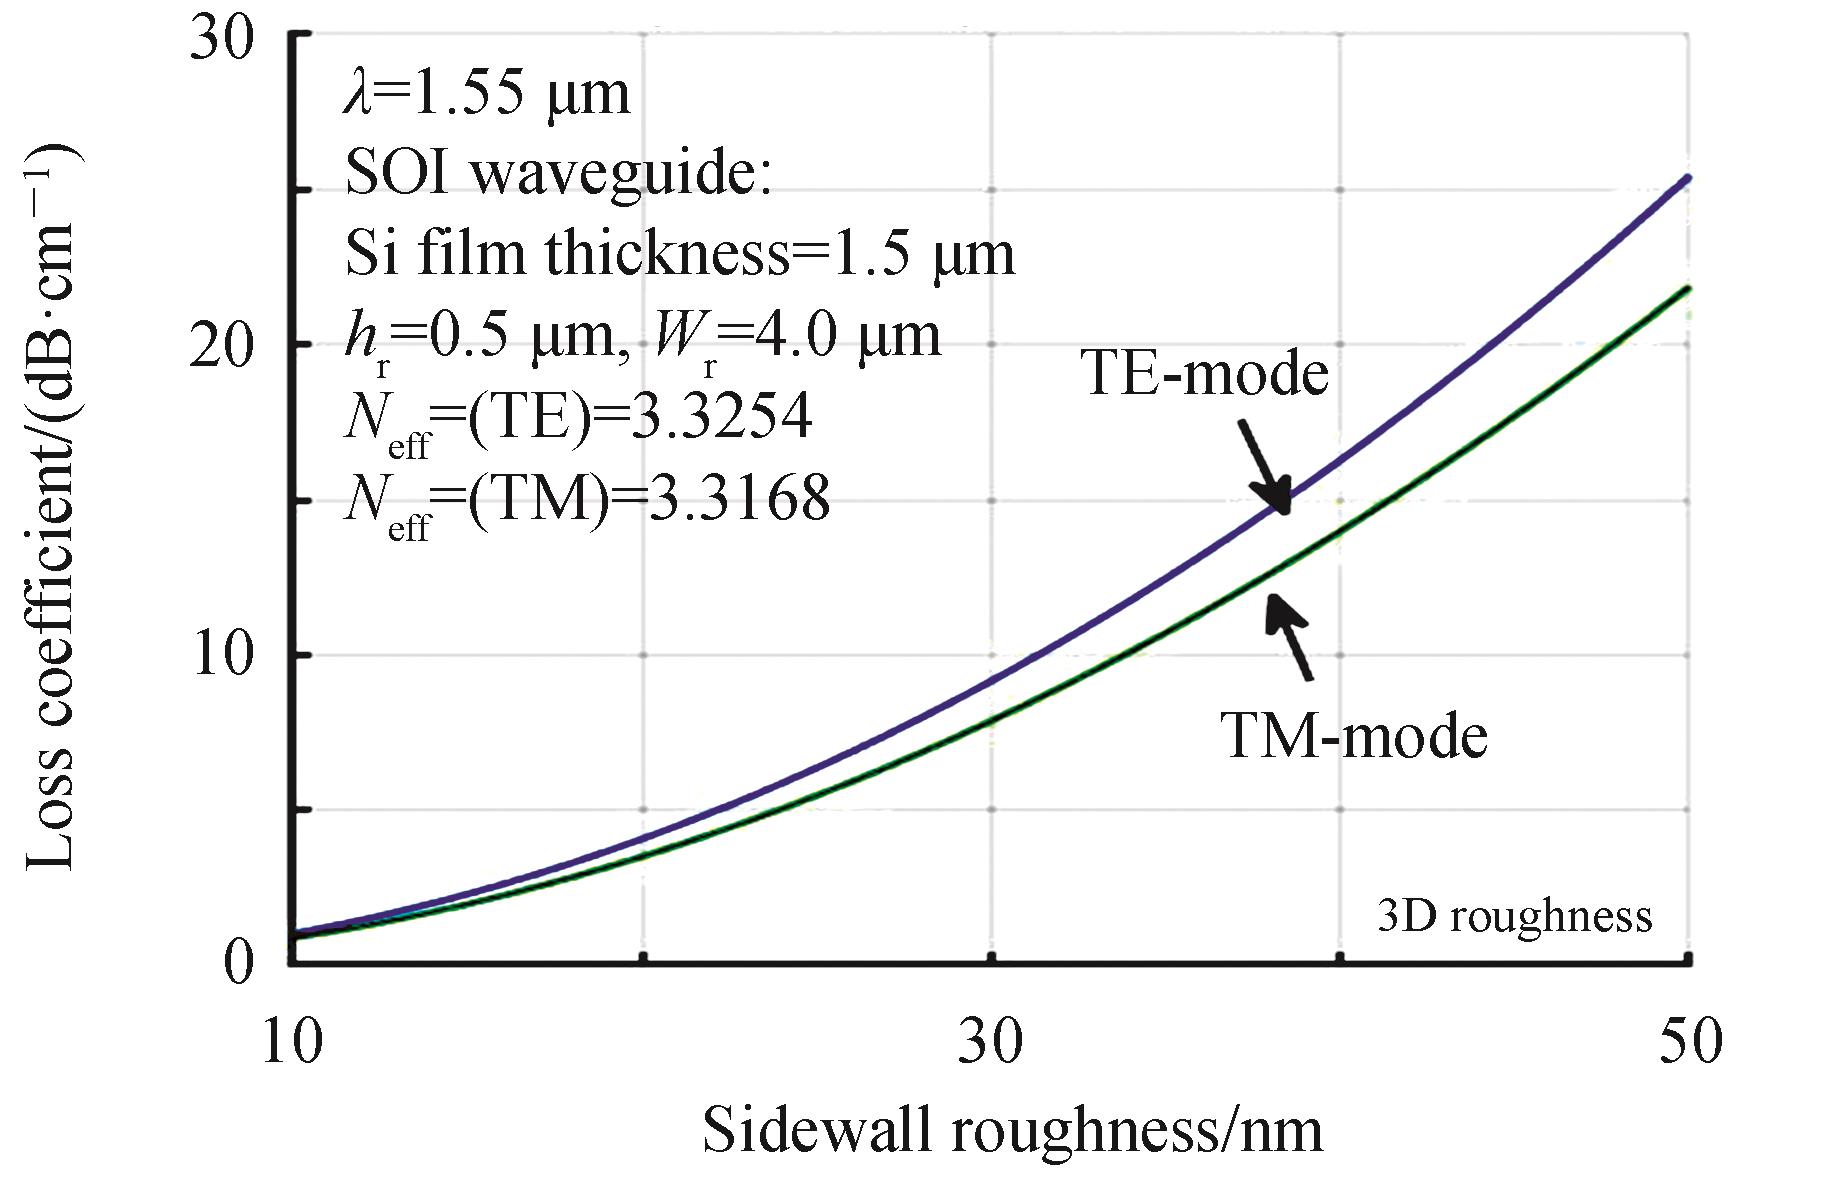 Numerical simulations for the OPL coefficient α3D vs SWR of SOI waveguide for TE- and TM-mode